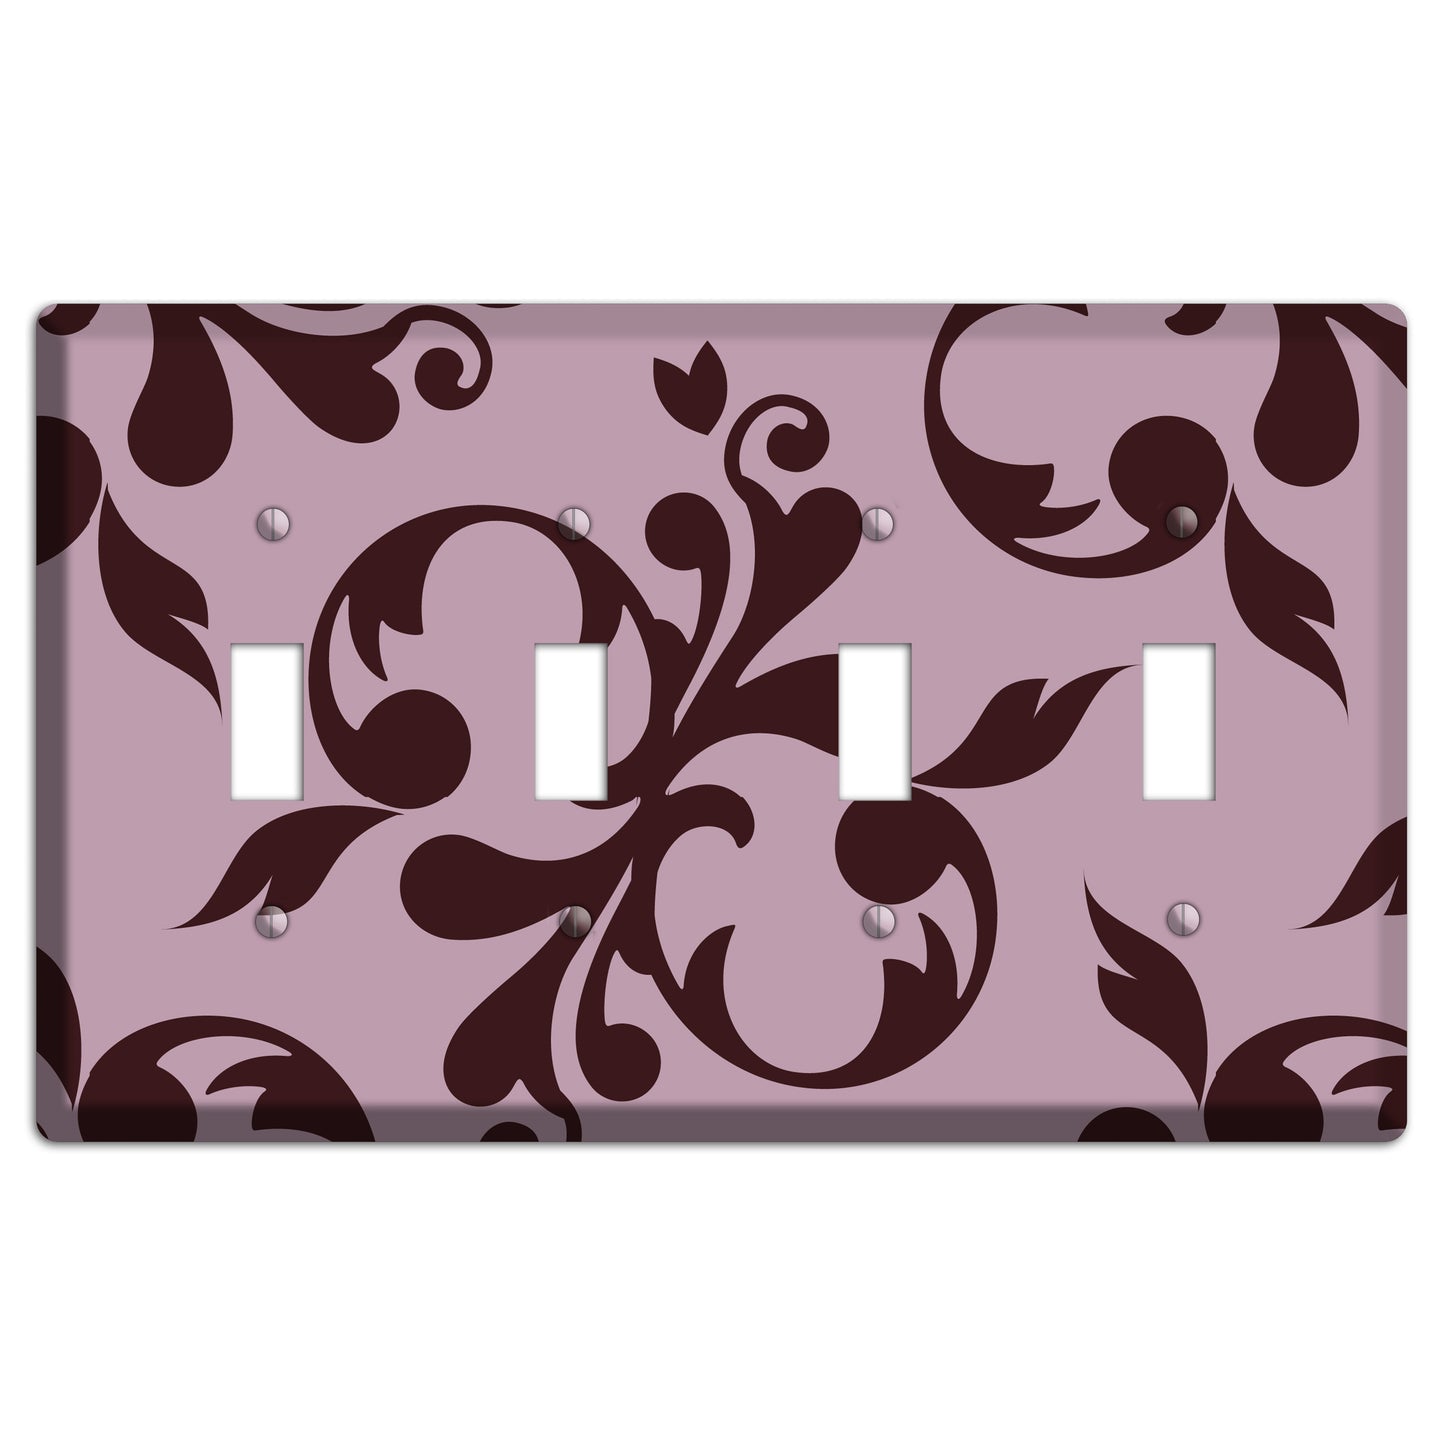 Dusty Rose and Burgundy Toile 4 Toggle Wallplate